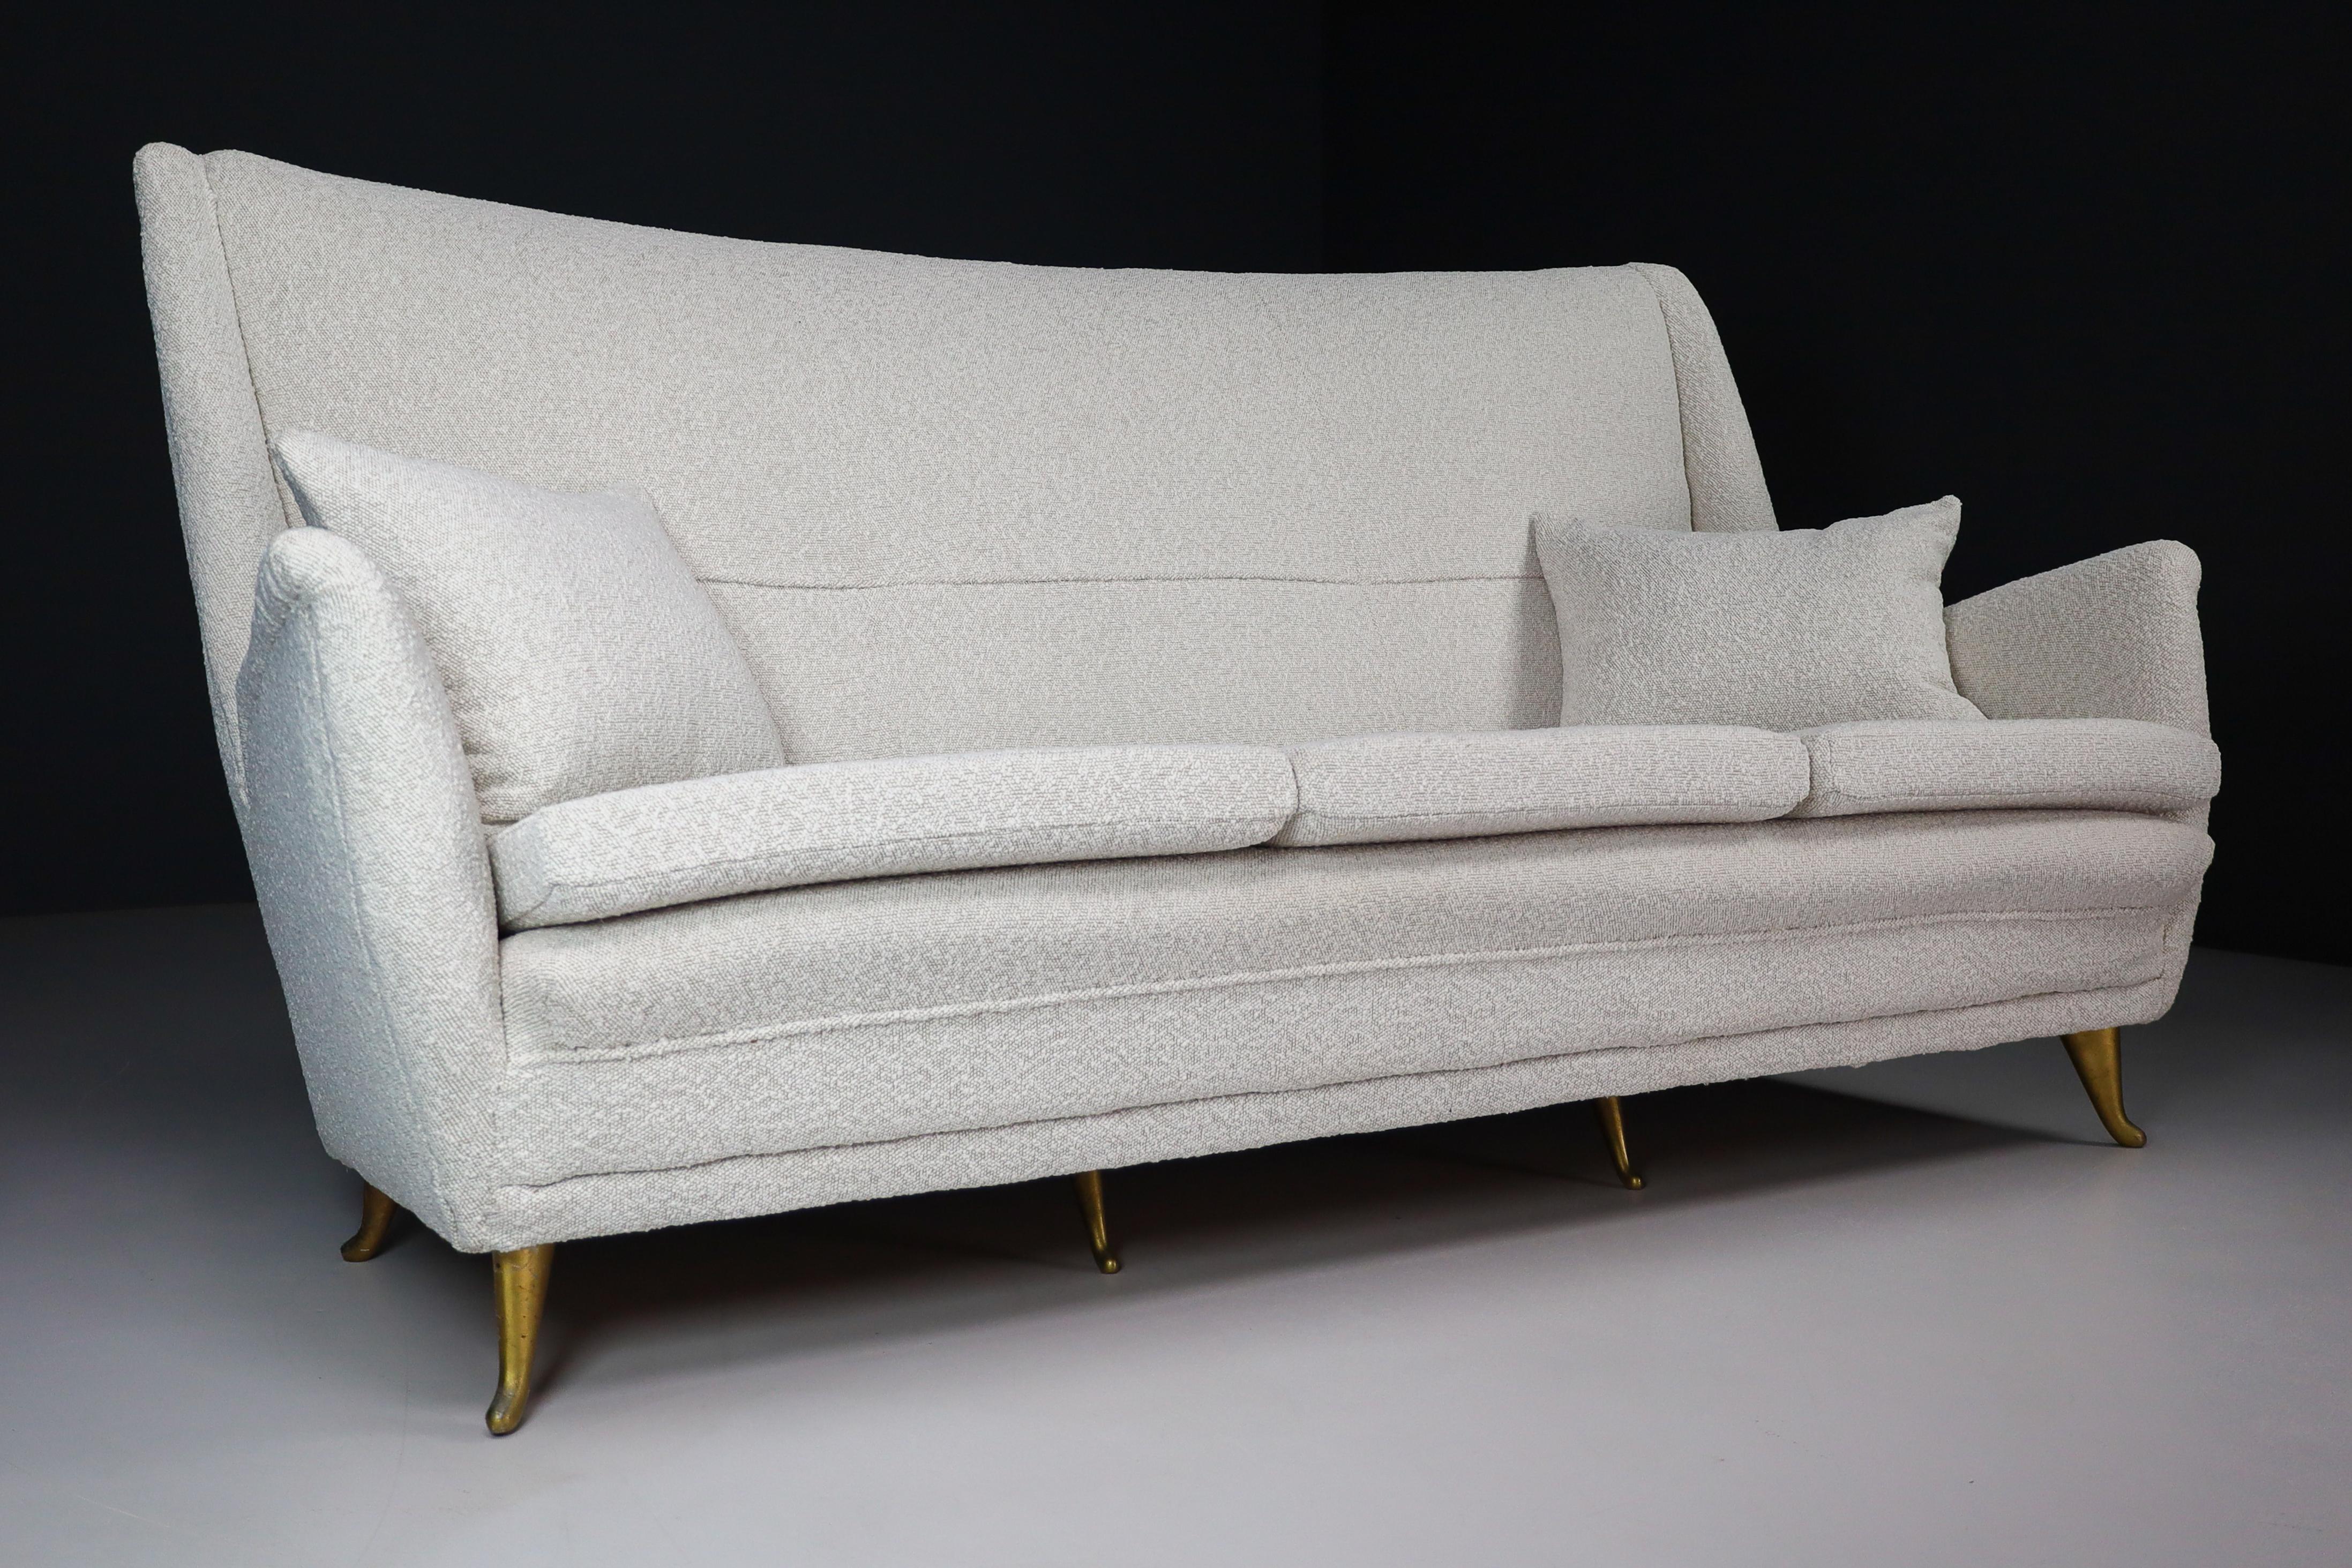 20th Century High Back Sofa By Gio Ponti For ISA Bergamo in Bouclé Fabric Upholstery 1950s For Sale